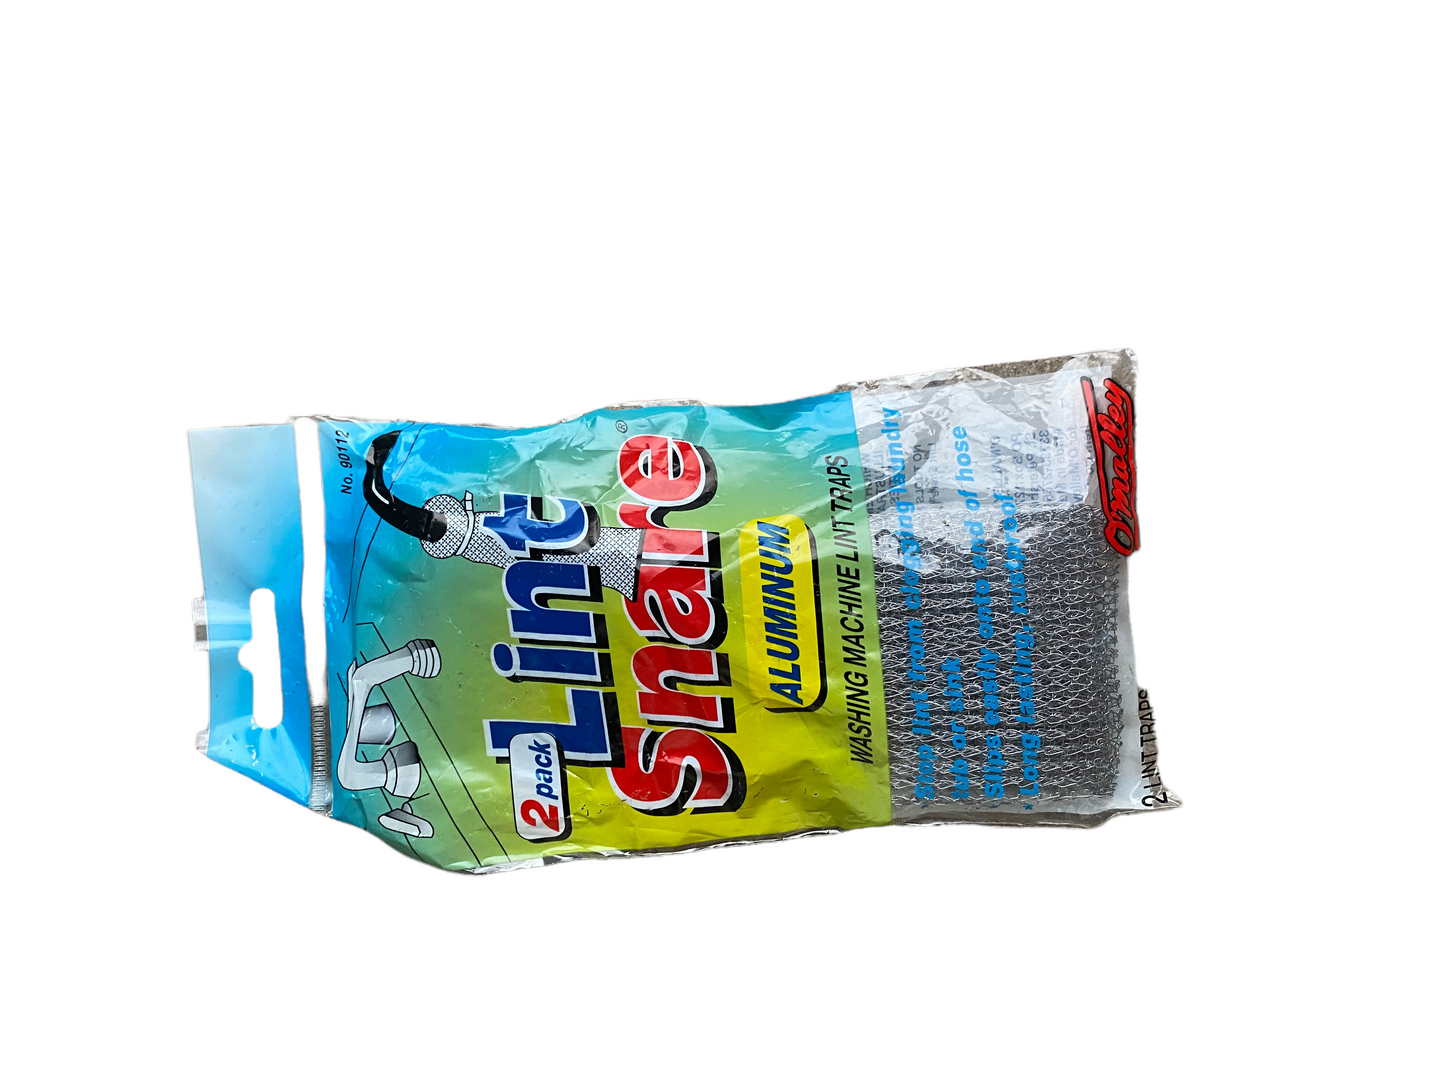 Omalley Lint Snare Aluminum Bagged Pack of 2